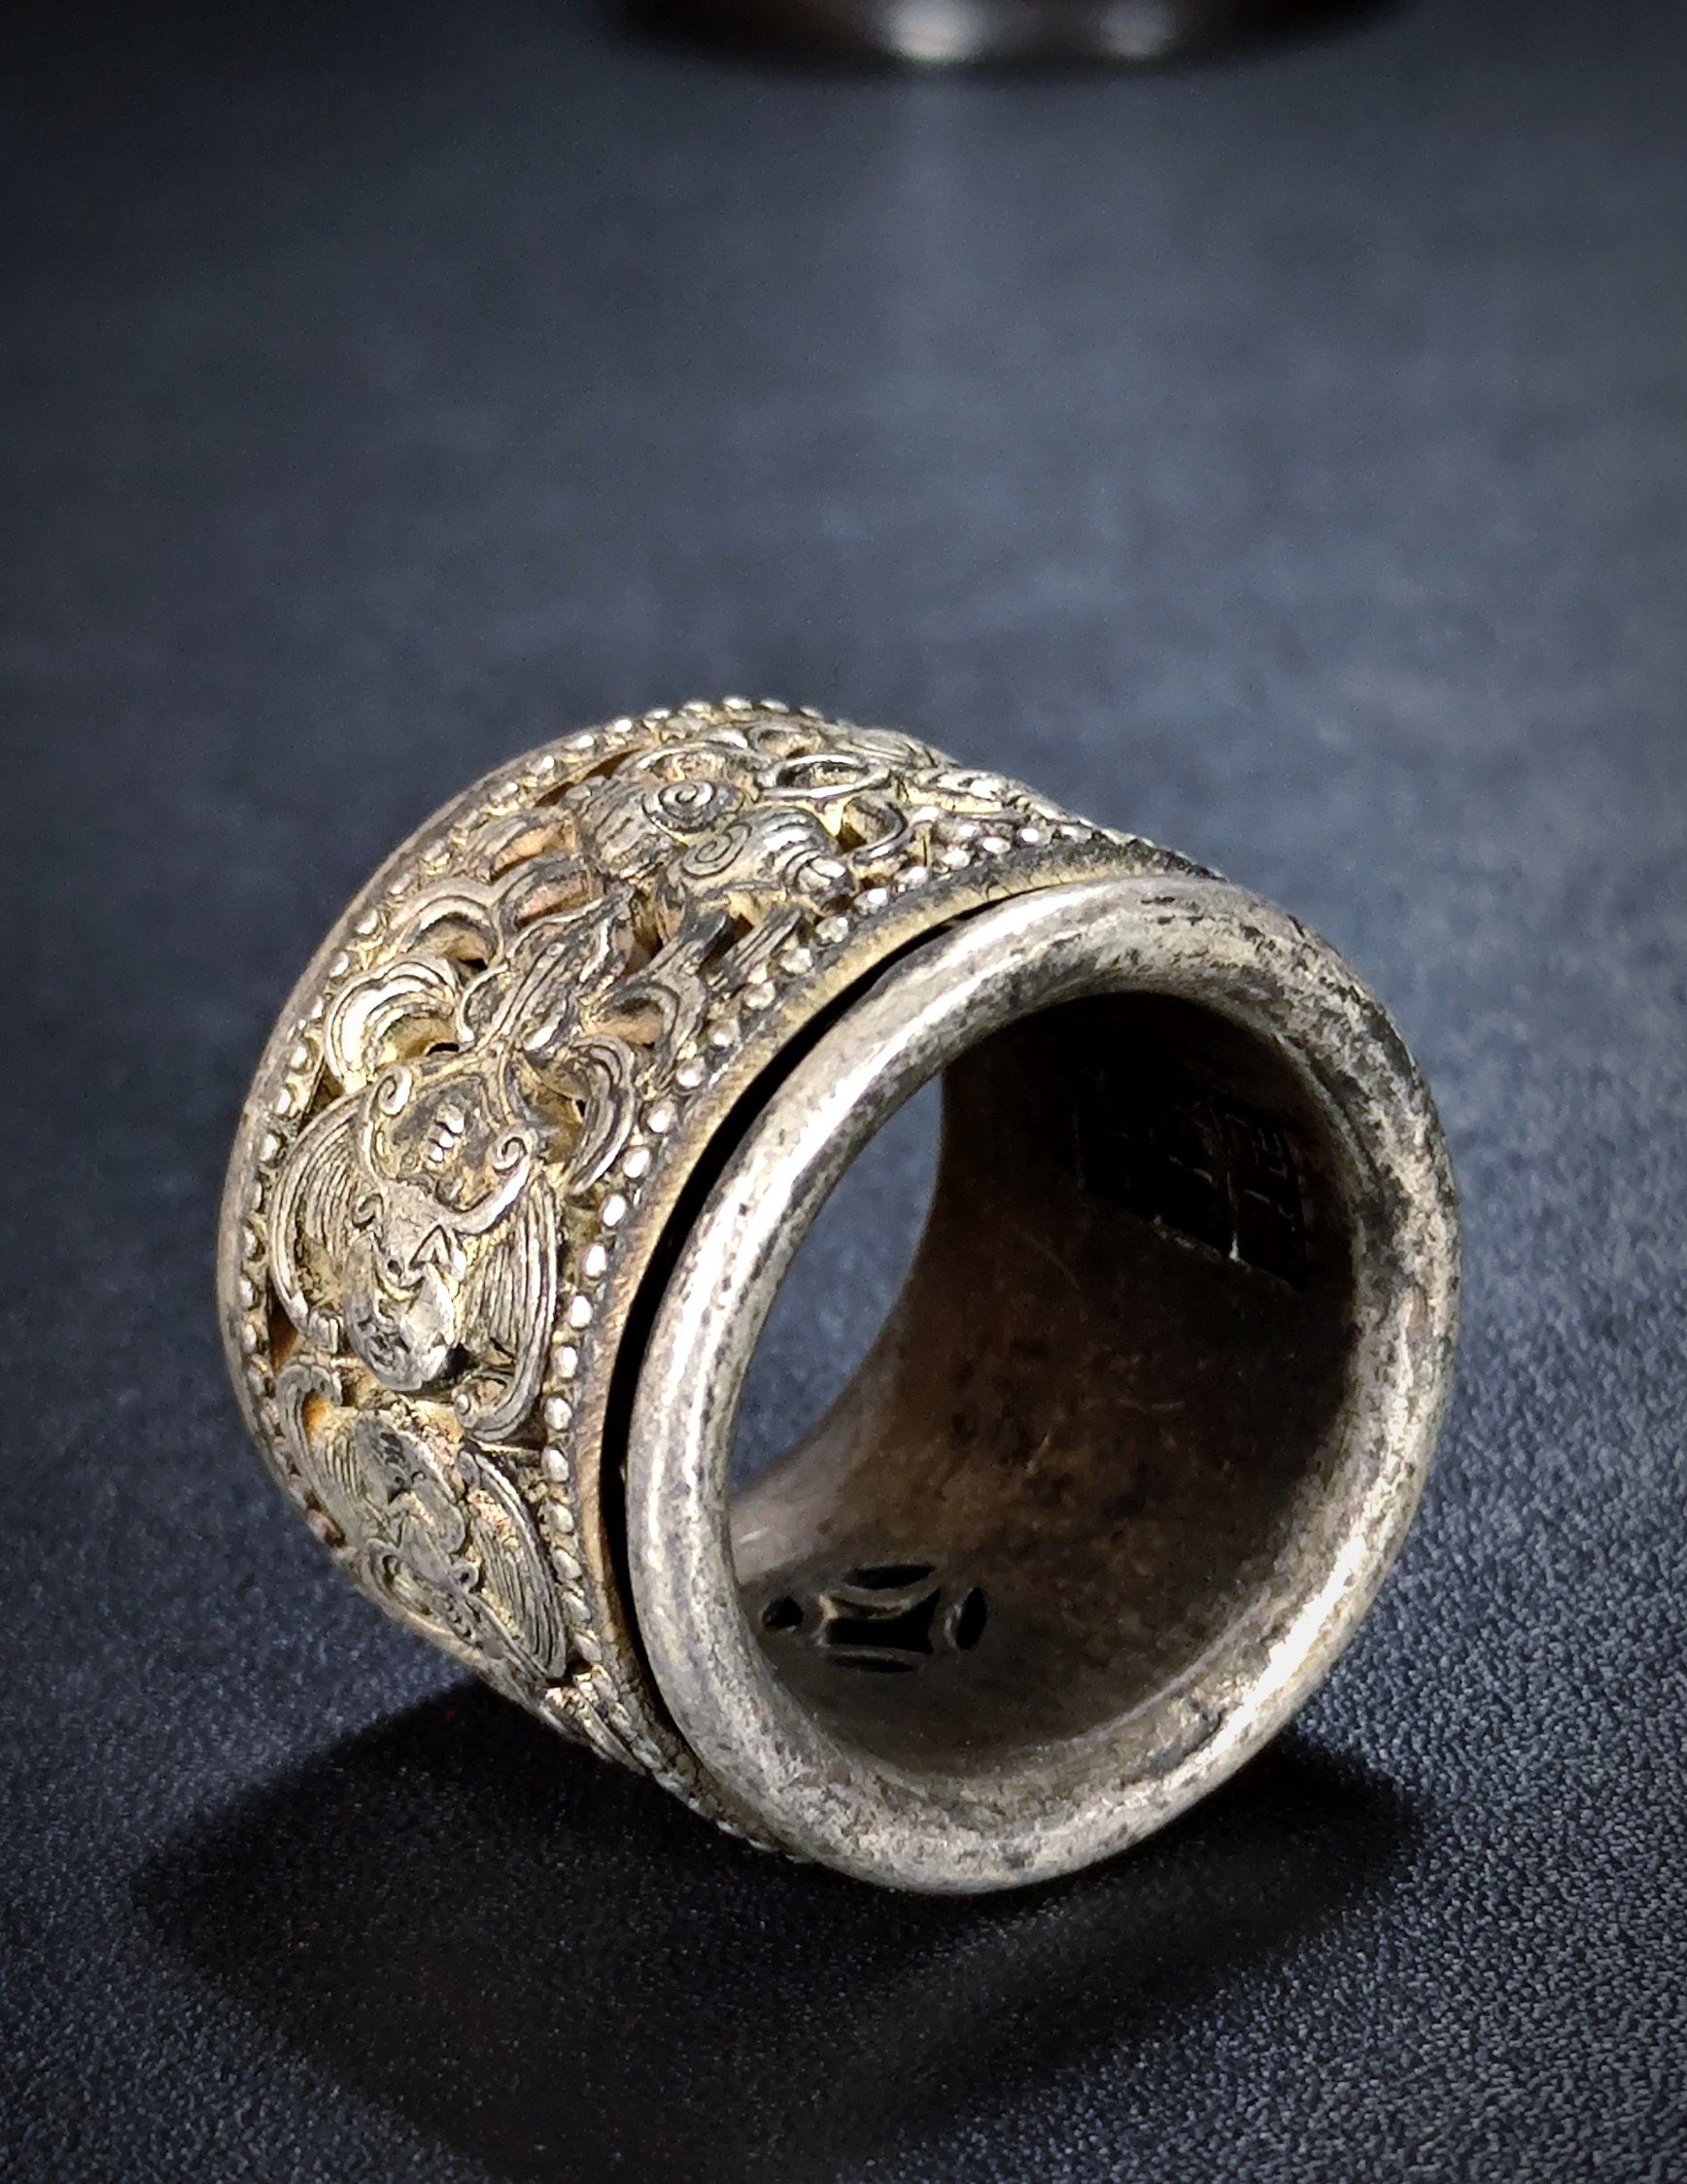 Qing Dynasty silver ring with good fortune and longevity - Image 7 of 8